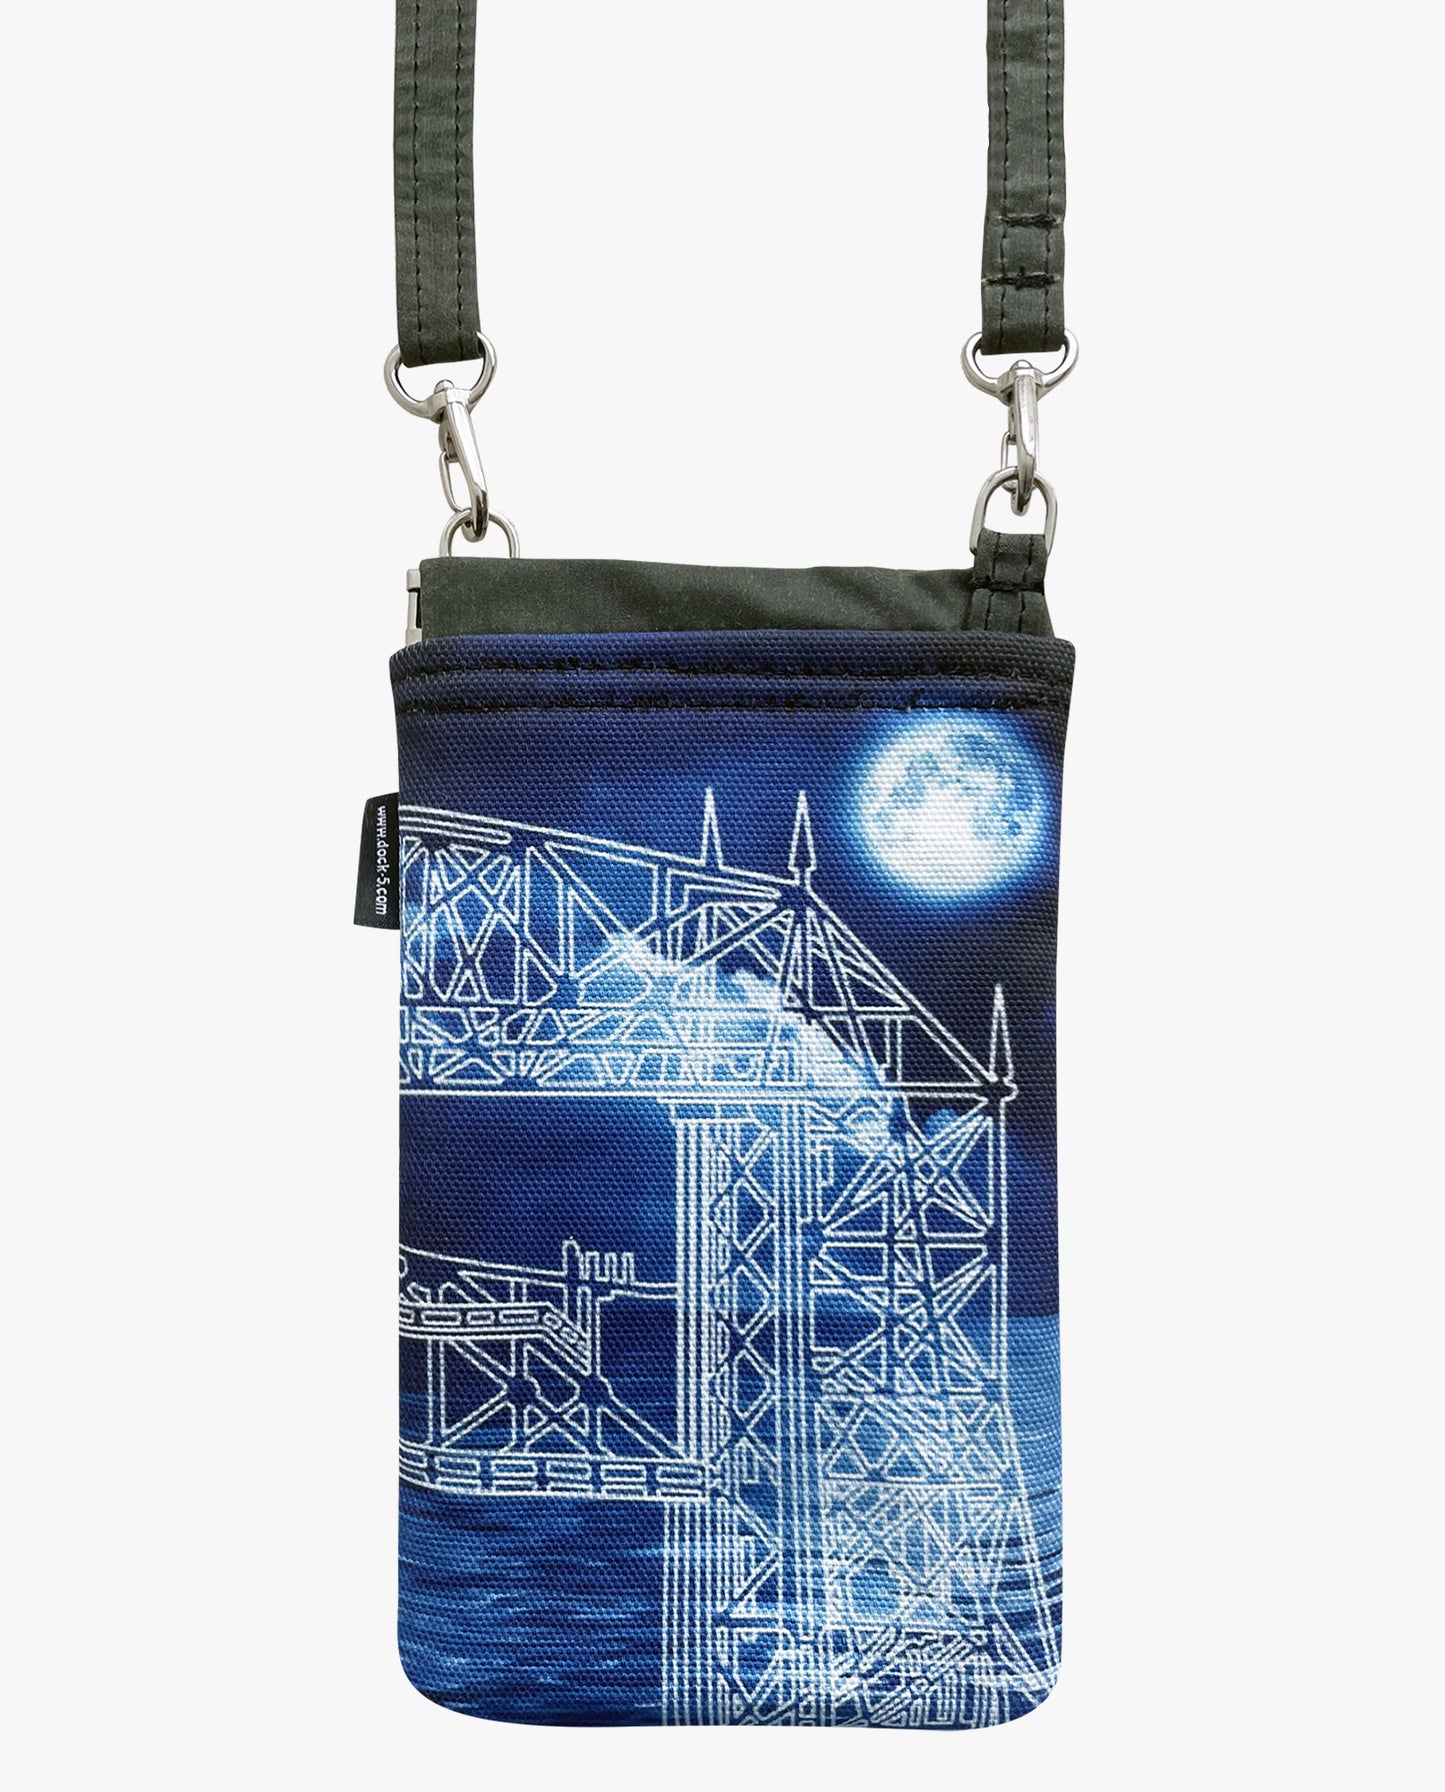 Lift Bridge cell phone bag front view by Dock 5 Duluth